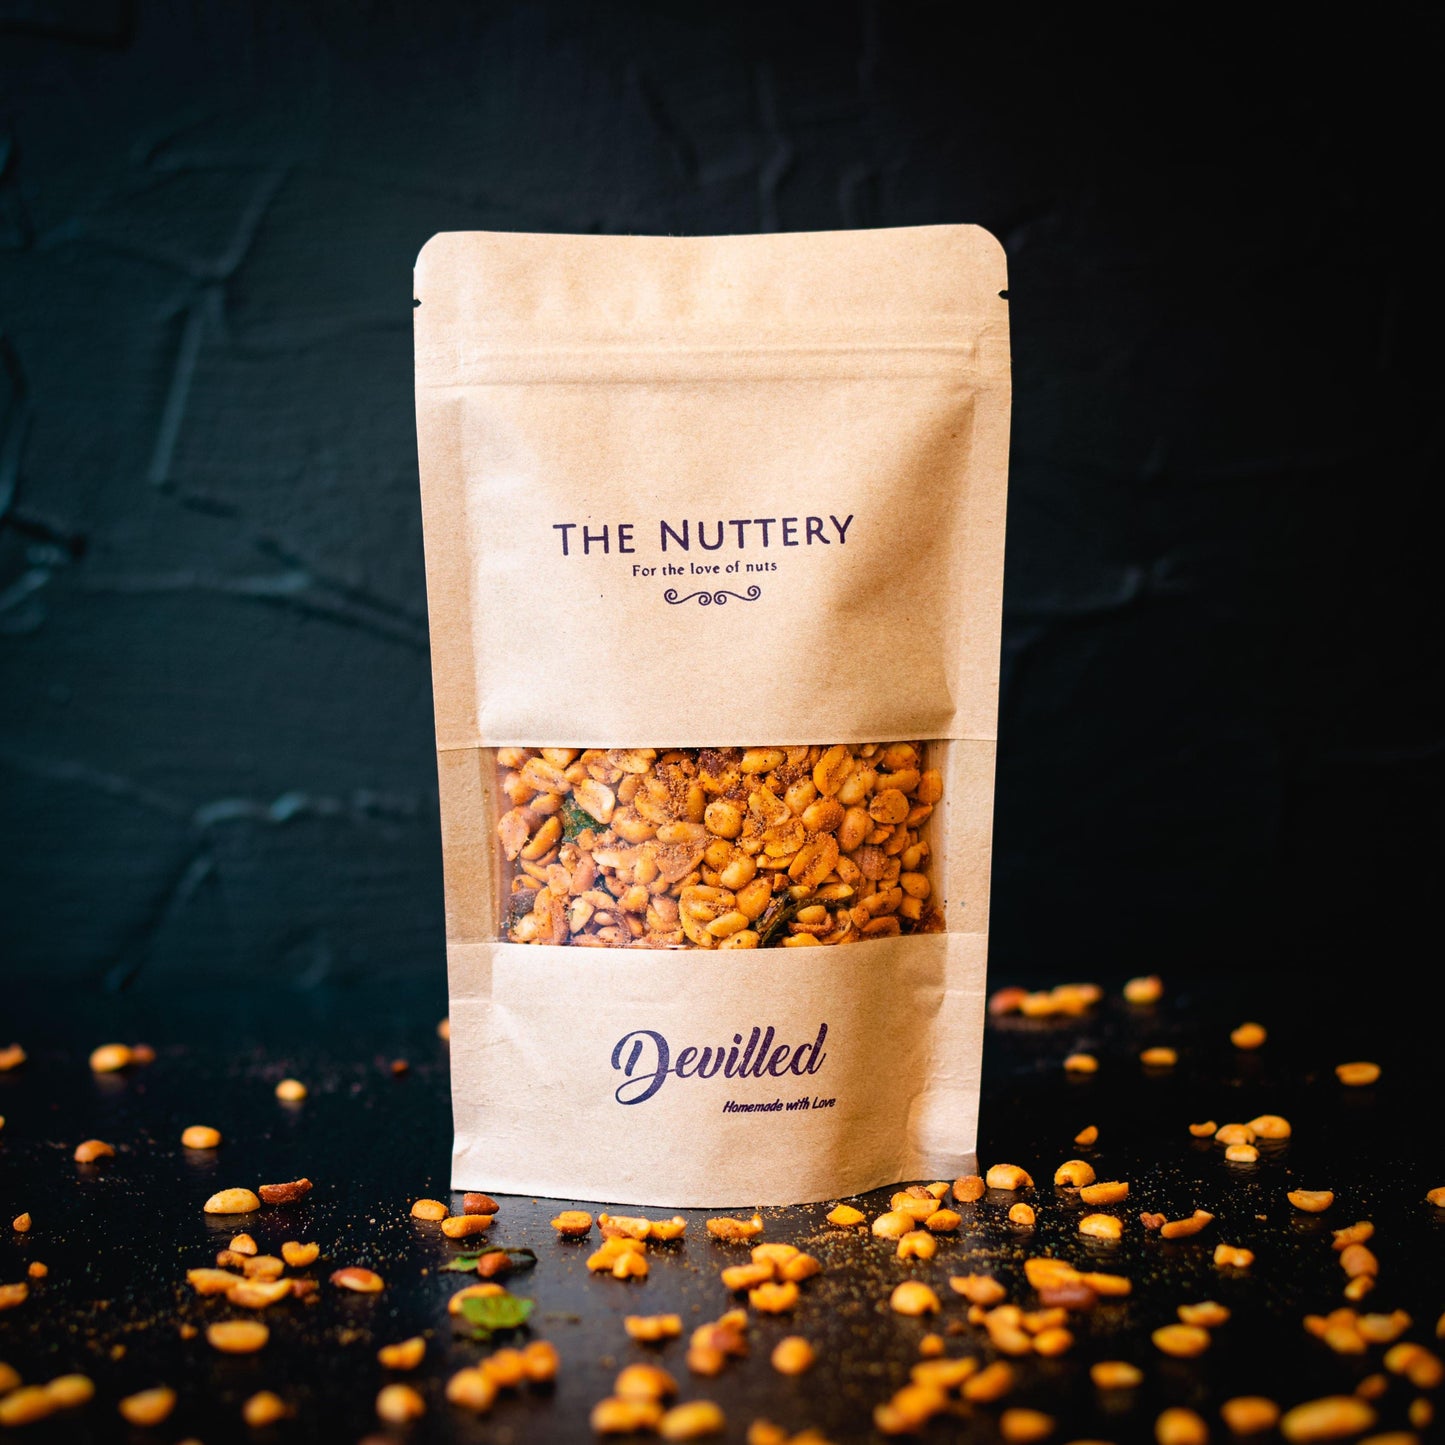 Devilled Peanuts - The Nuttery